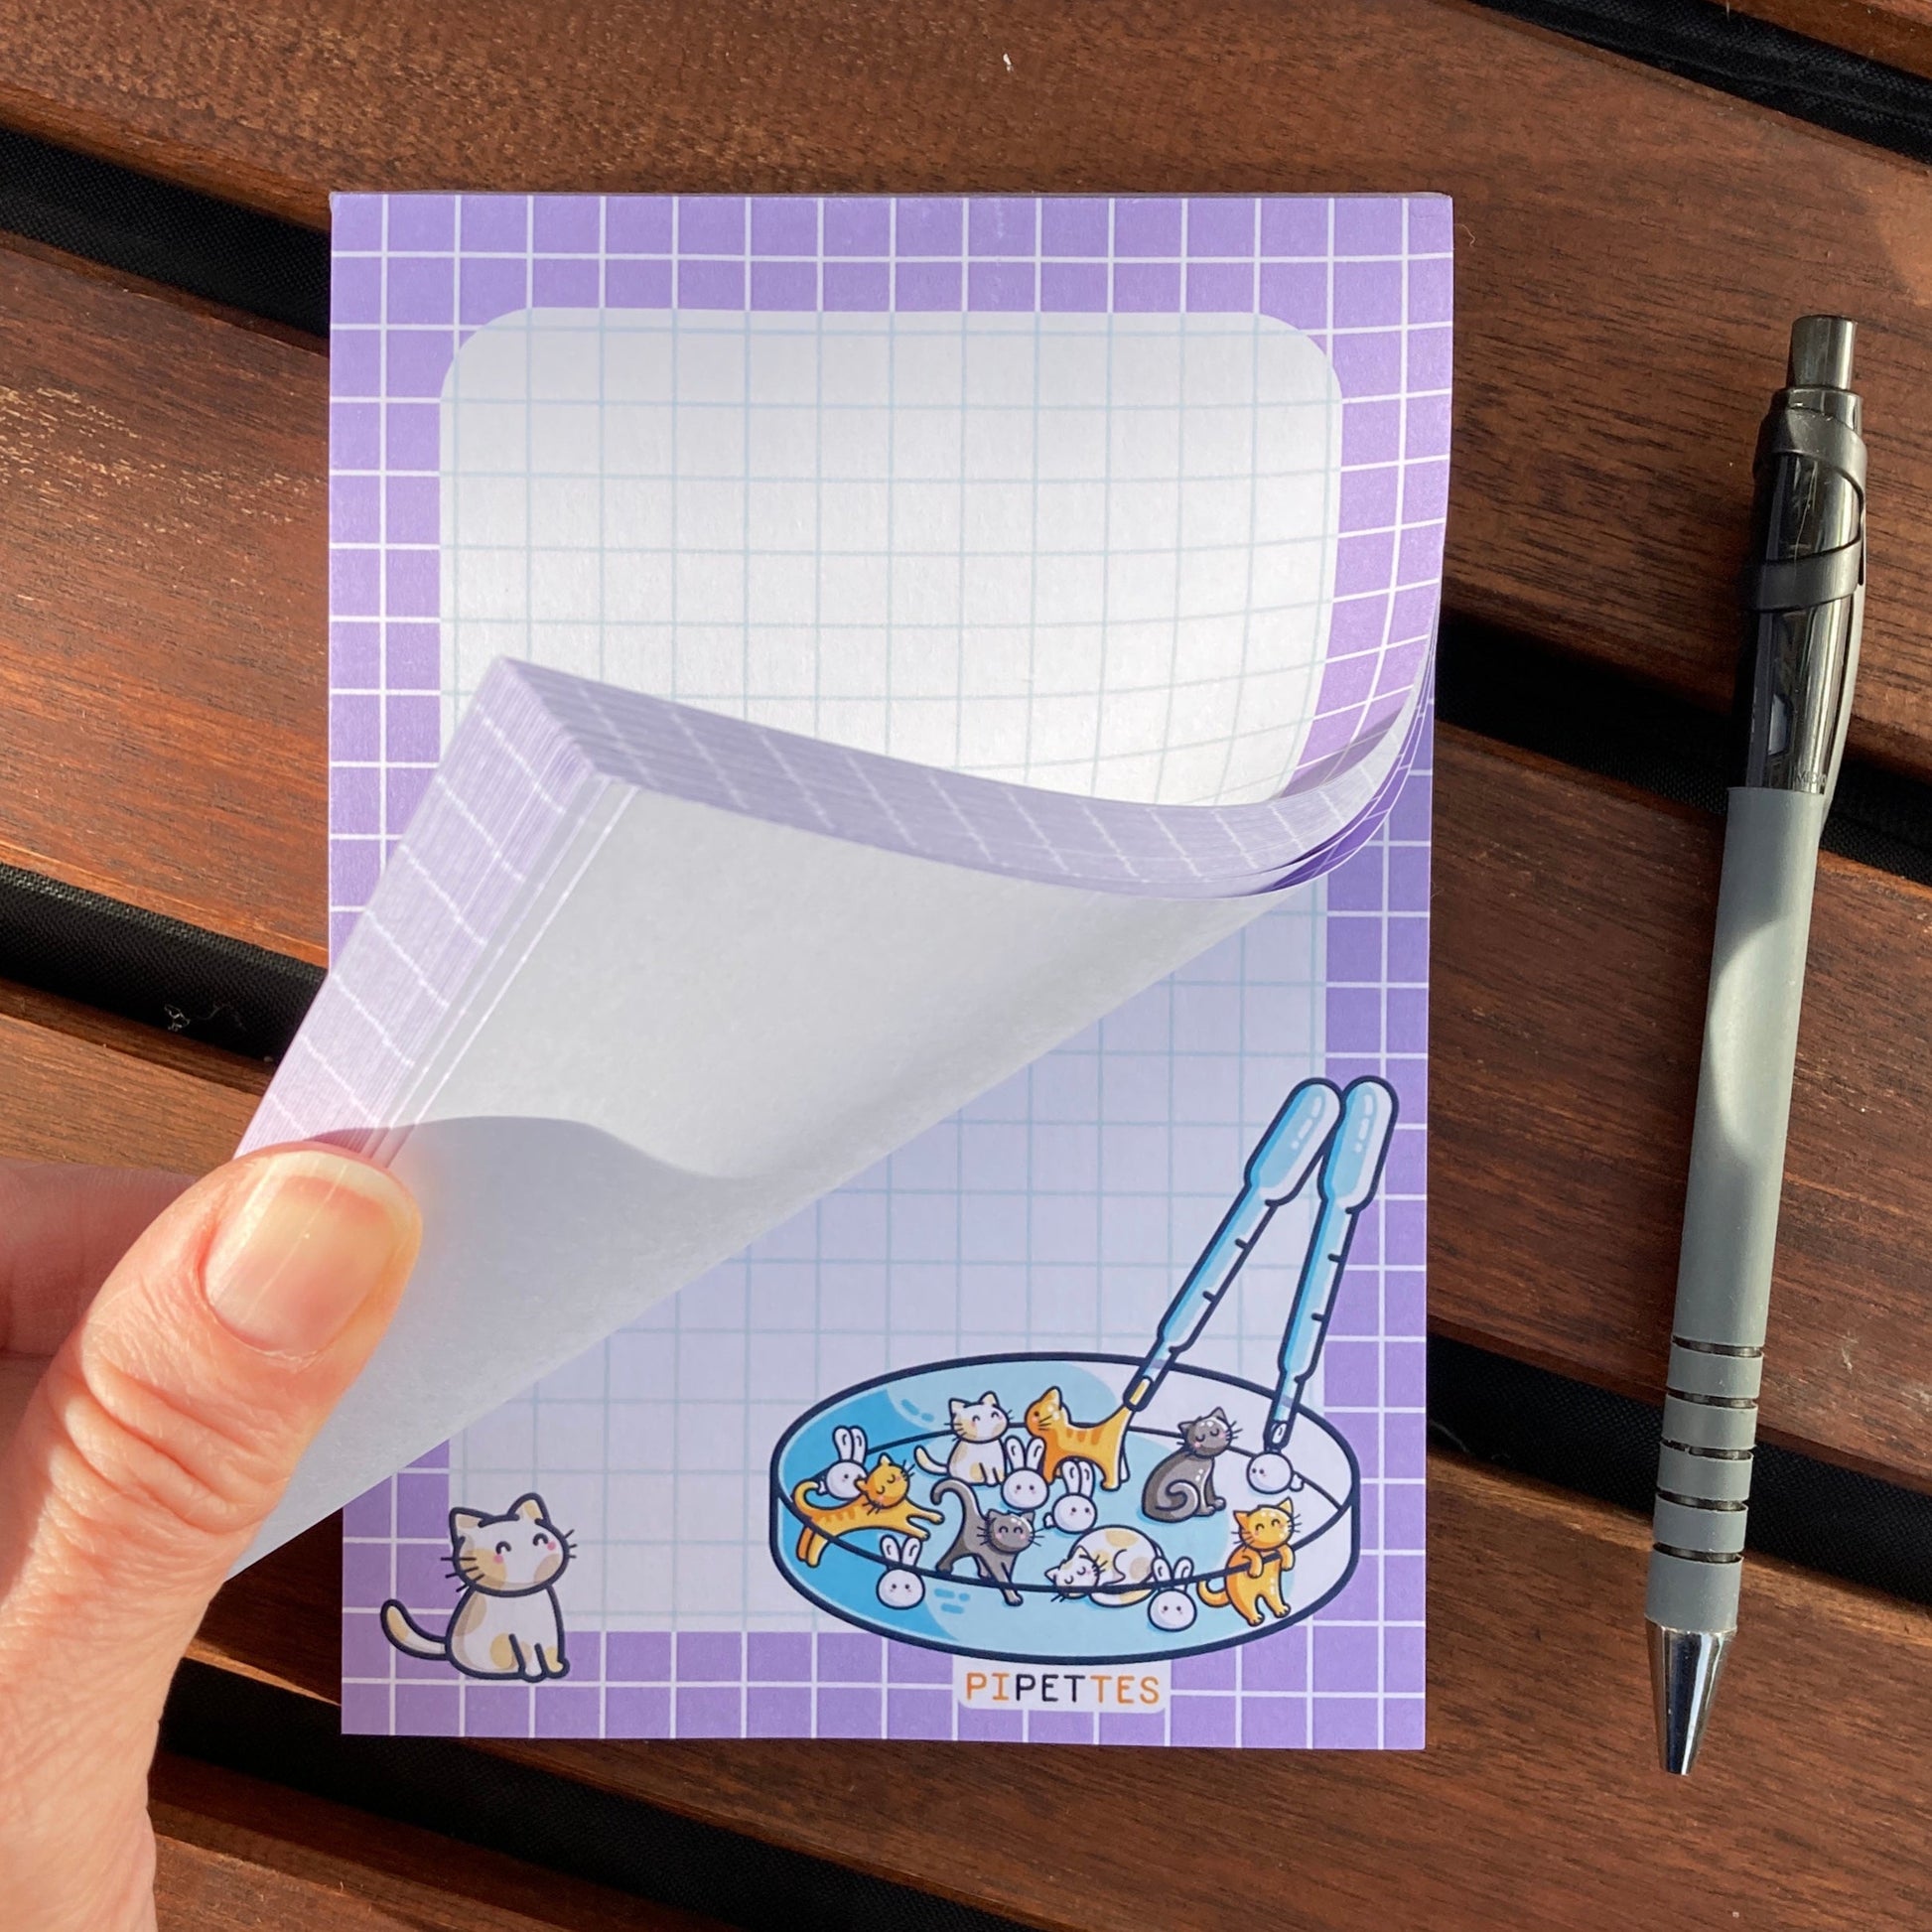 A hand flicking through the pages of the notepad to show that the pipettes design is printed on every tear off sheet.